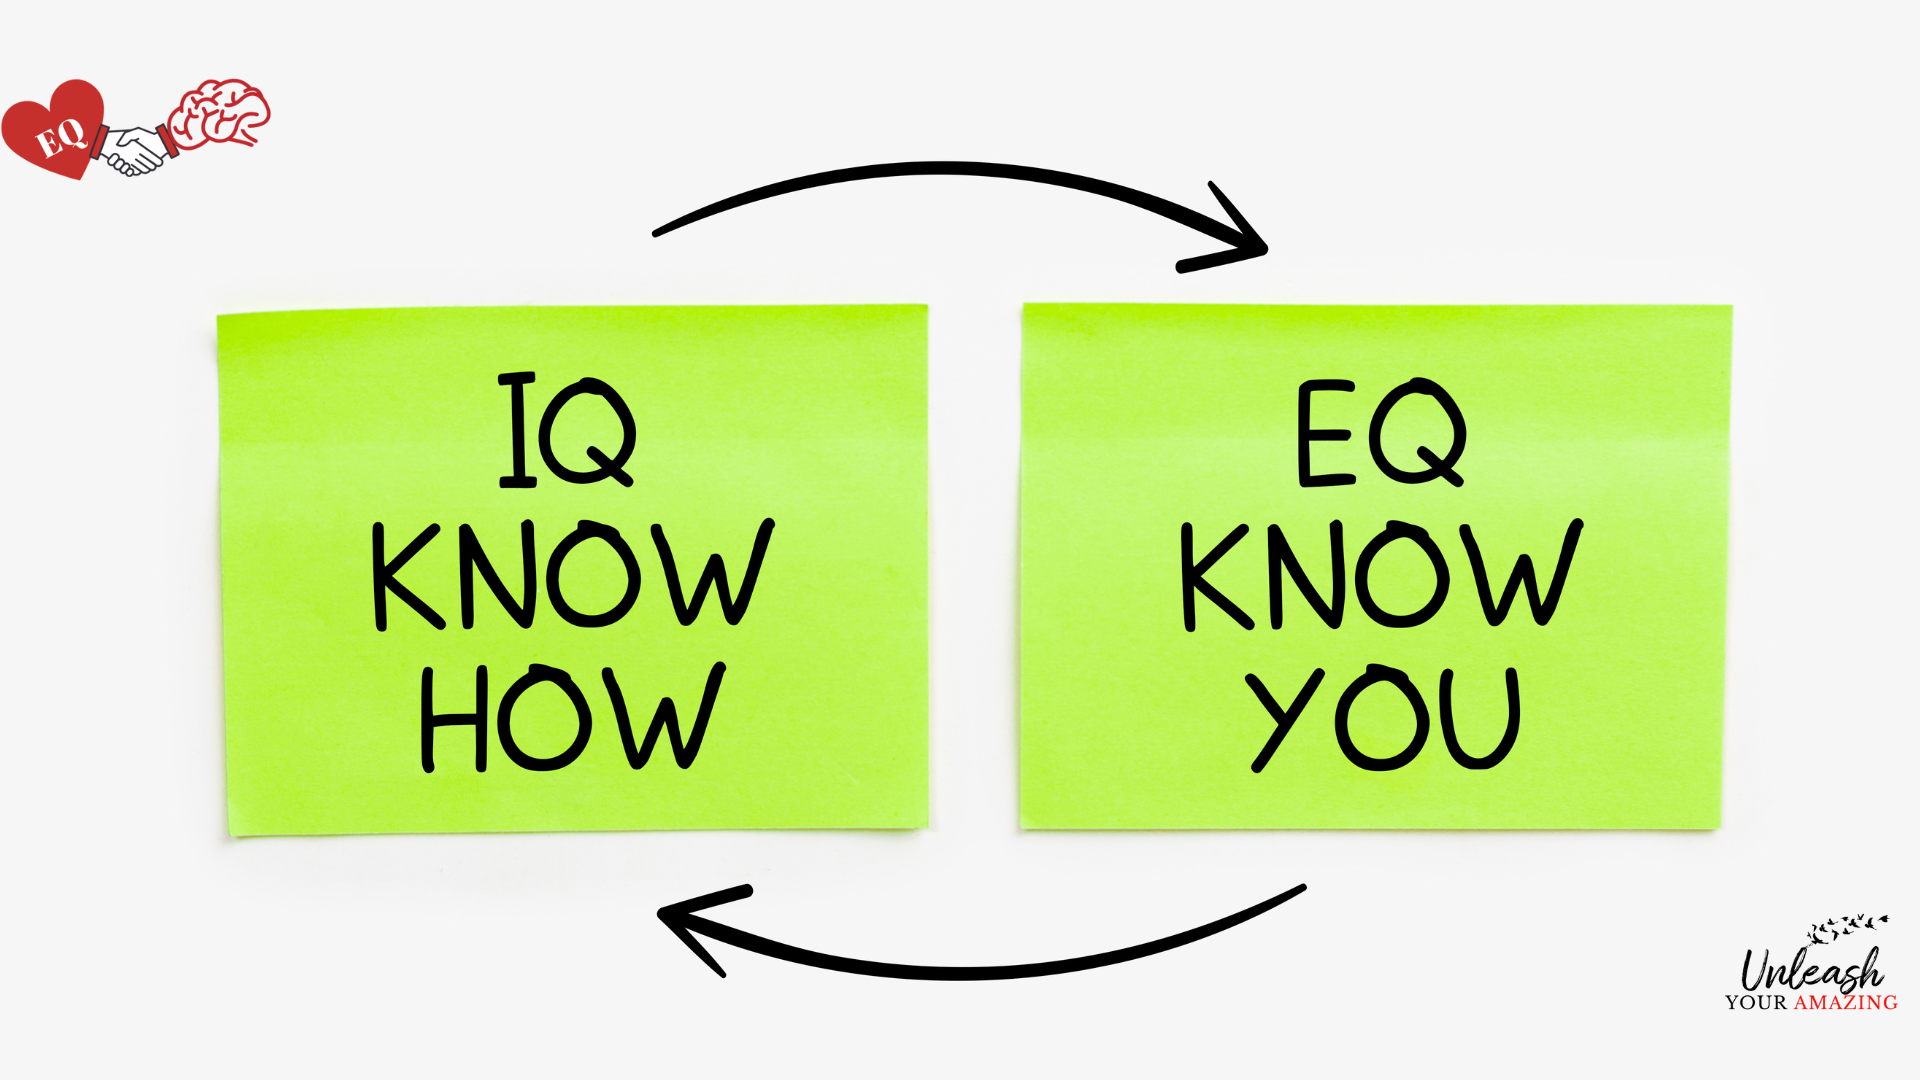 IQ is the Know How - EQ is knowing YourSelf